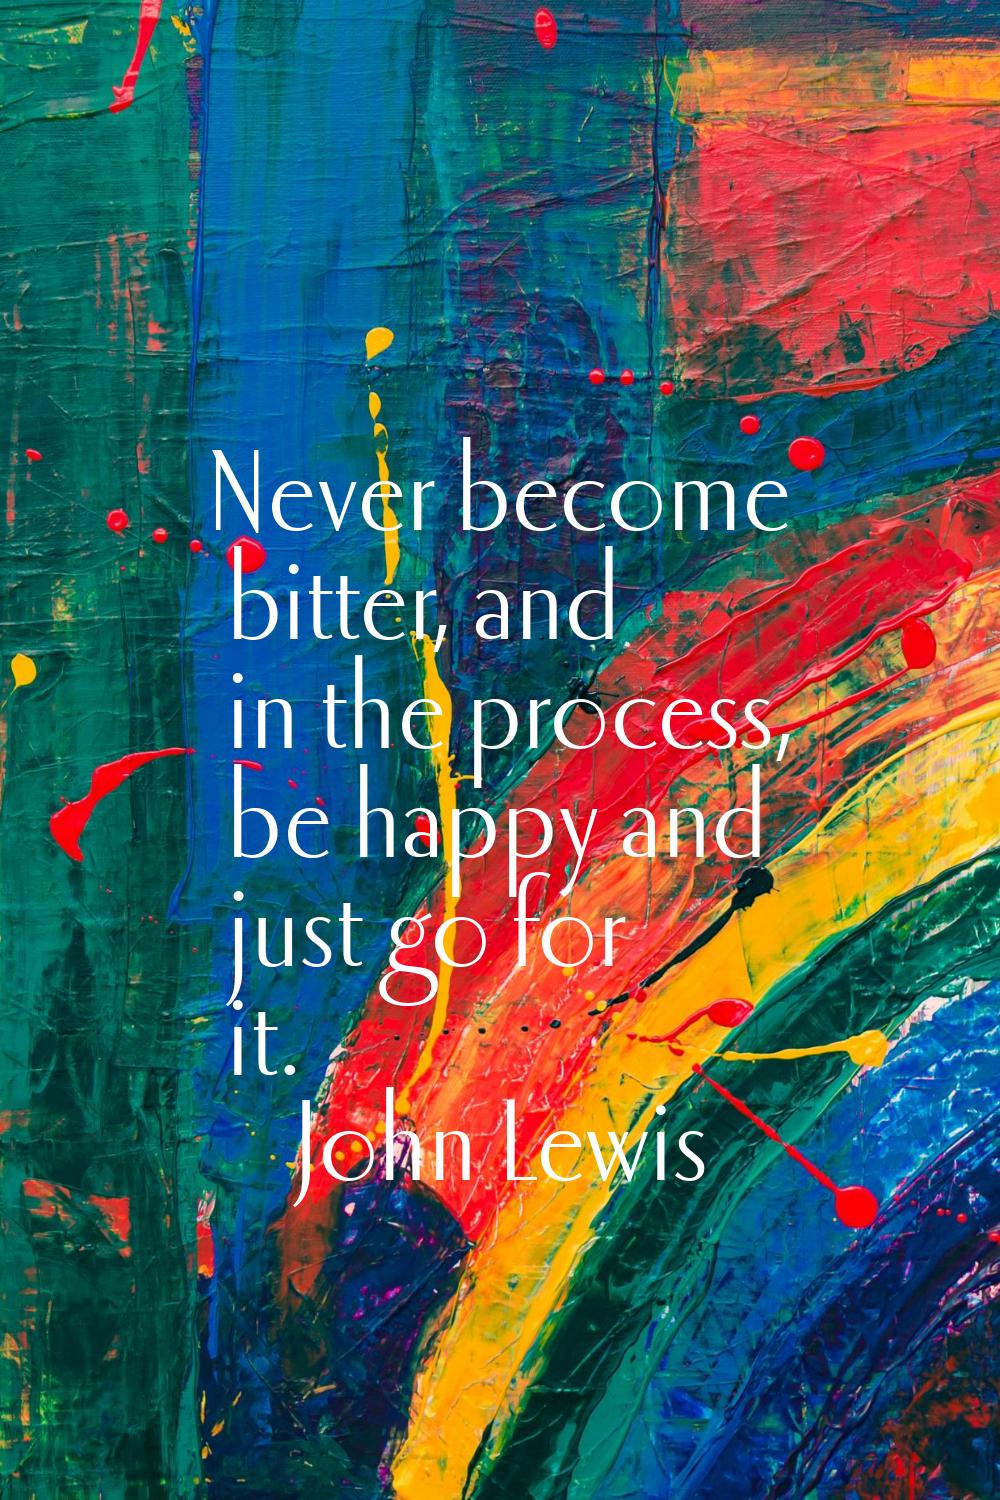 Never become bitter, and in the process, be happy and just go for it.